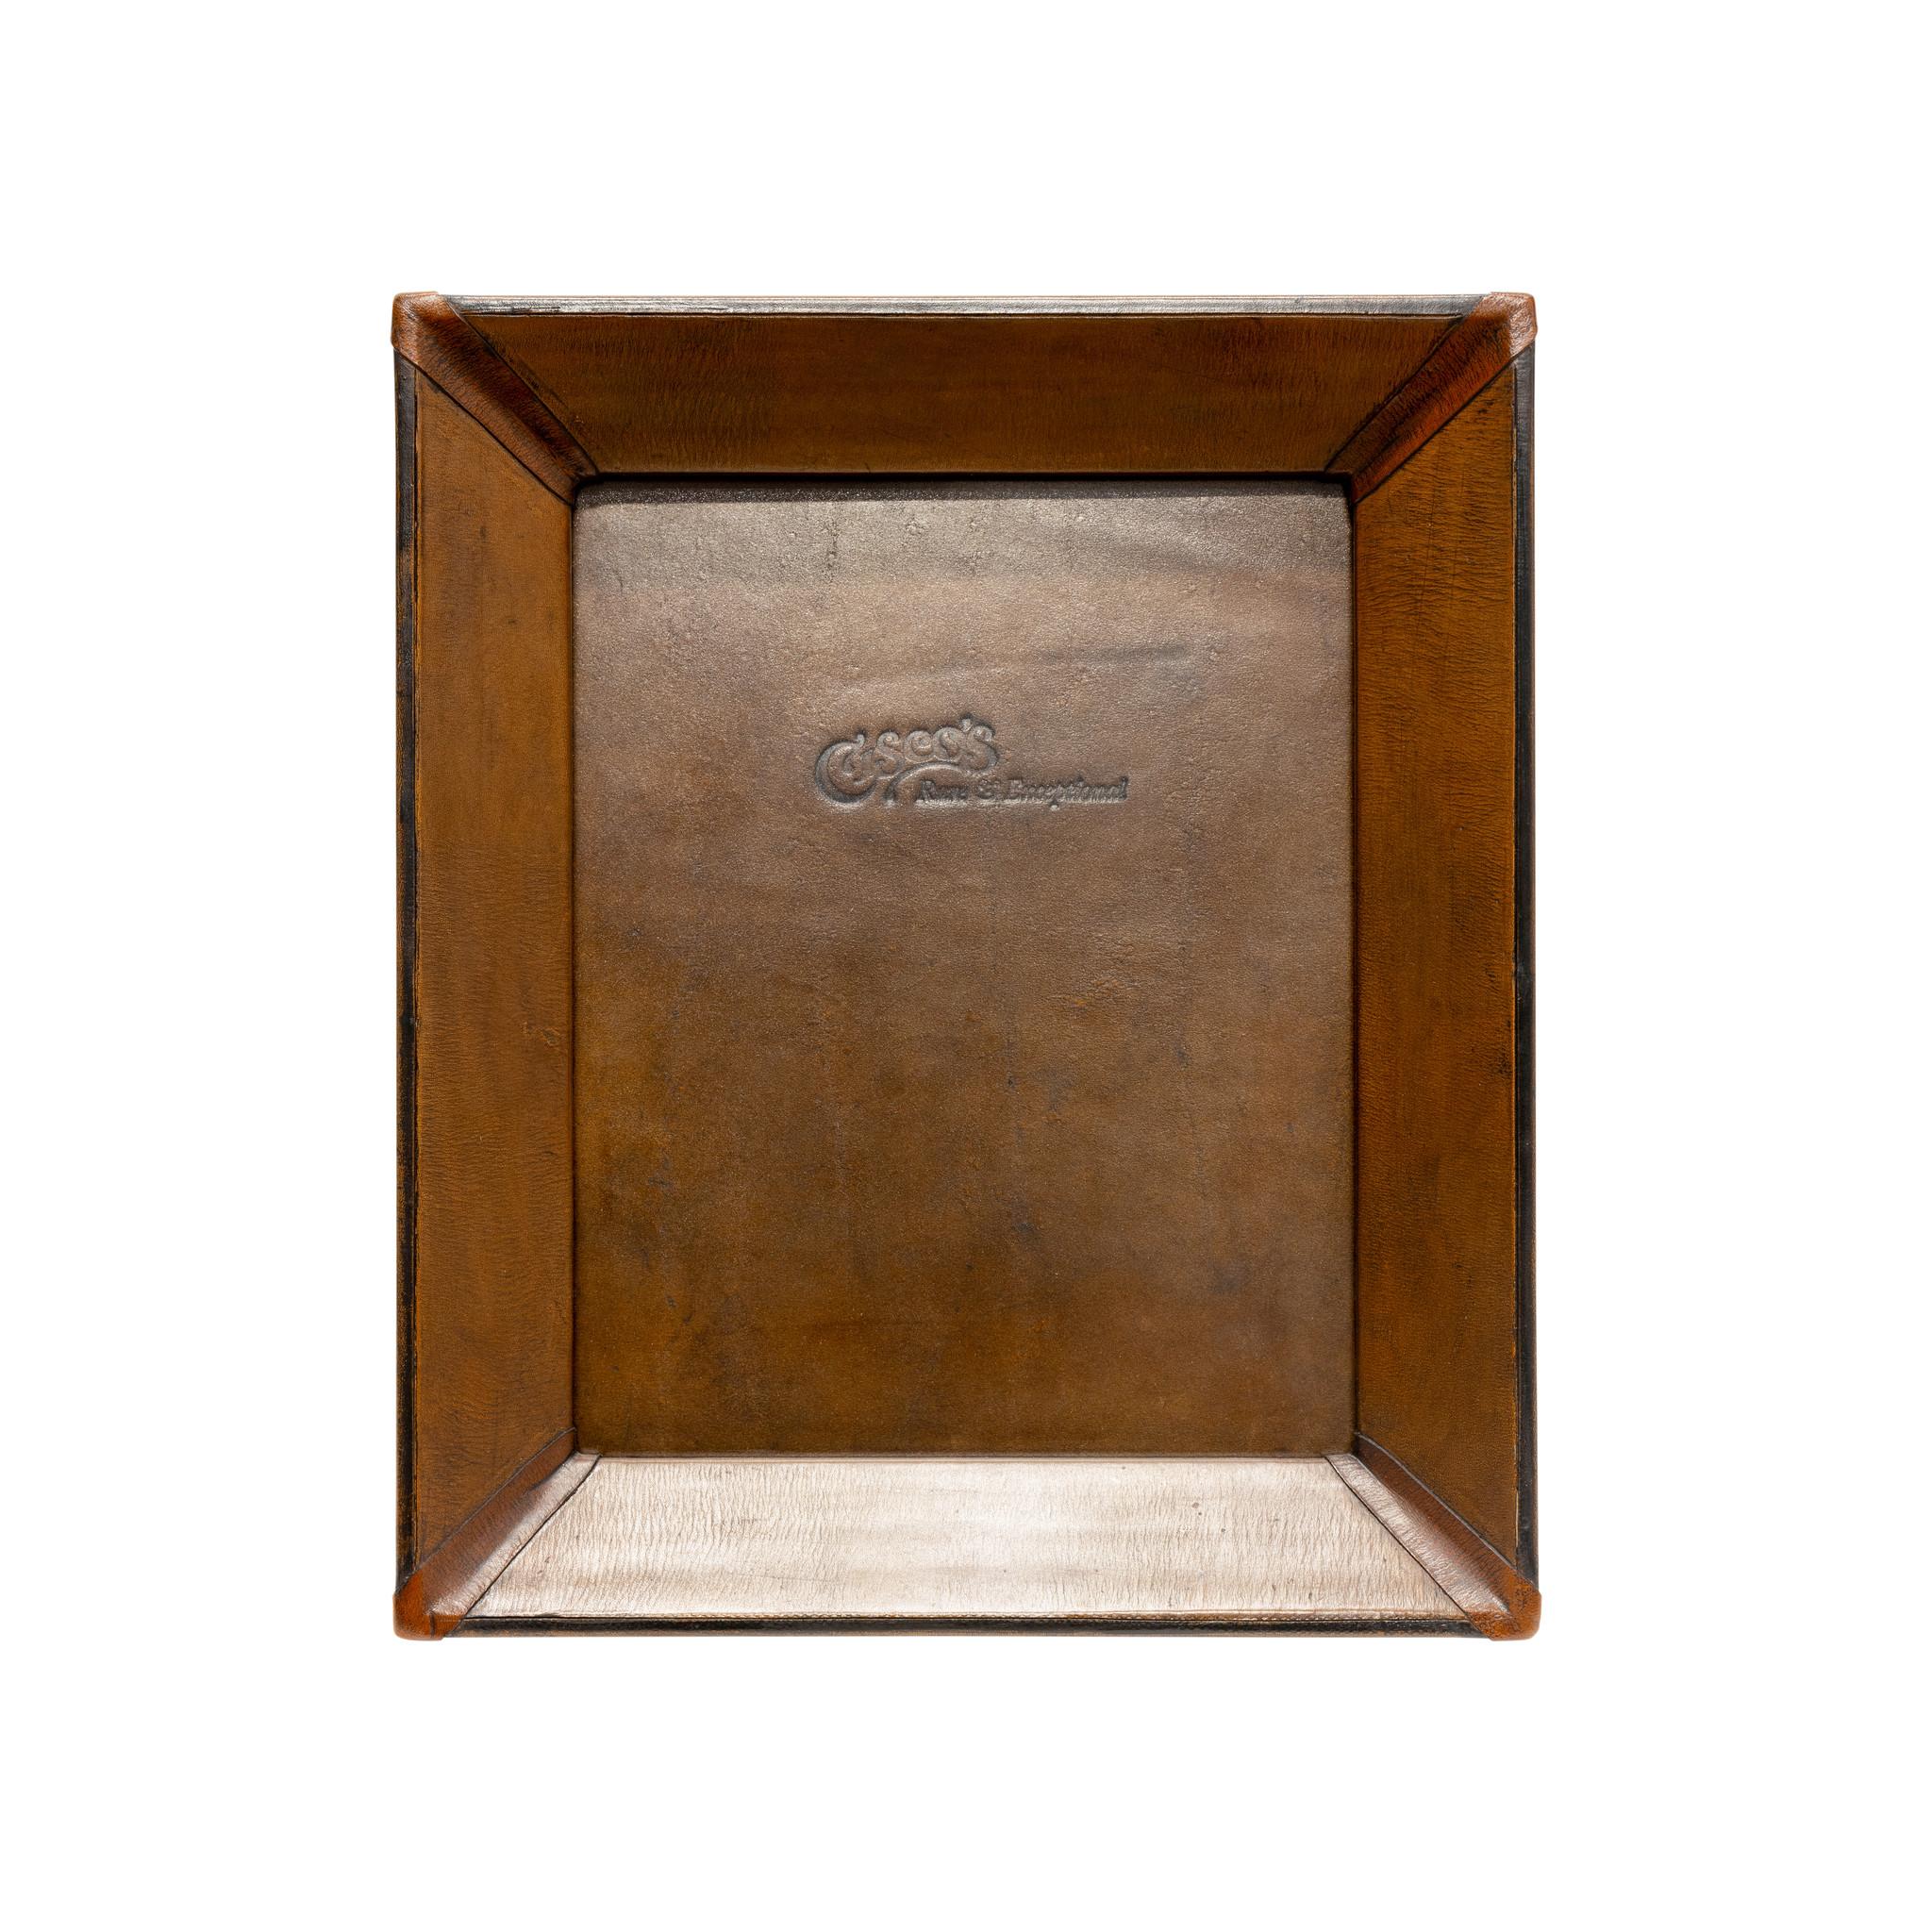 4 x 6 medium brown & black leather tabletop picture frame. Premium leather picture frames add the perfect accent to any home or office. Each frame is skillfully crafted by artisan saddle makers using genuine cowhide. Color: Medium brown with